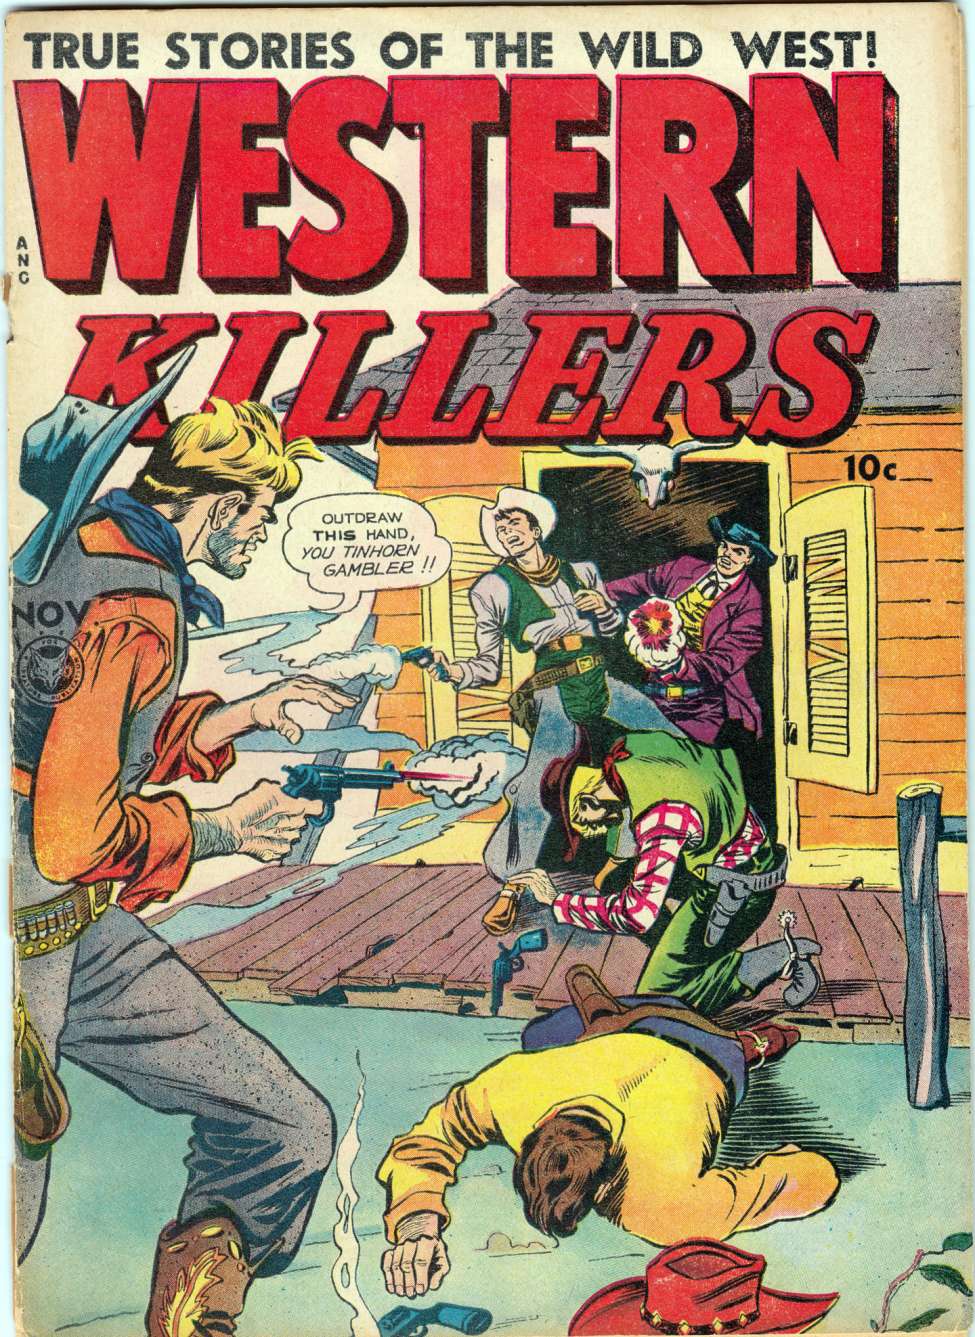 Book Cover For Western Killers 61 (alt) - Version 2